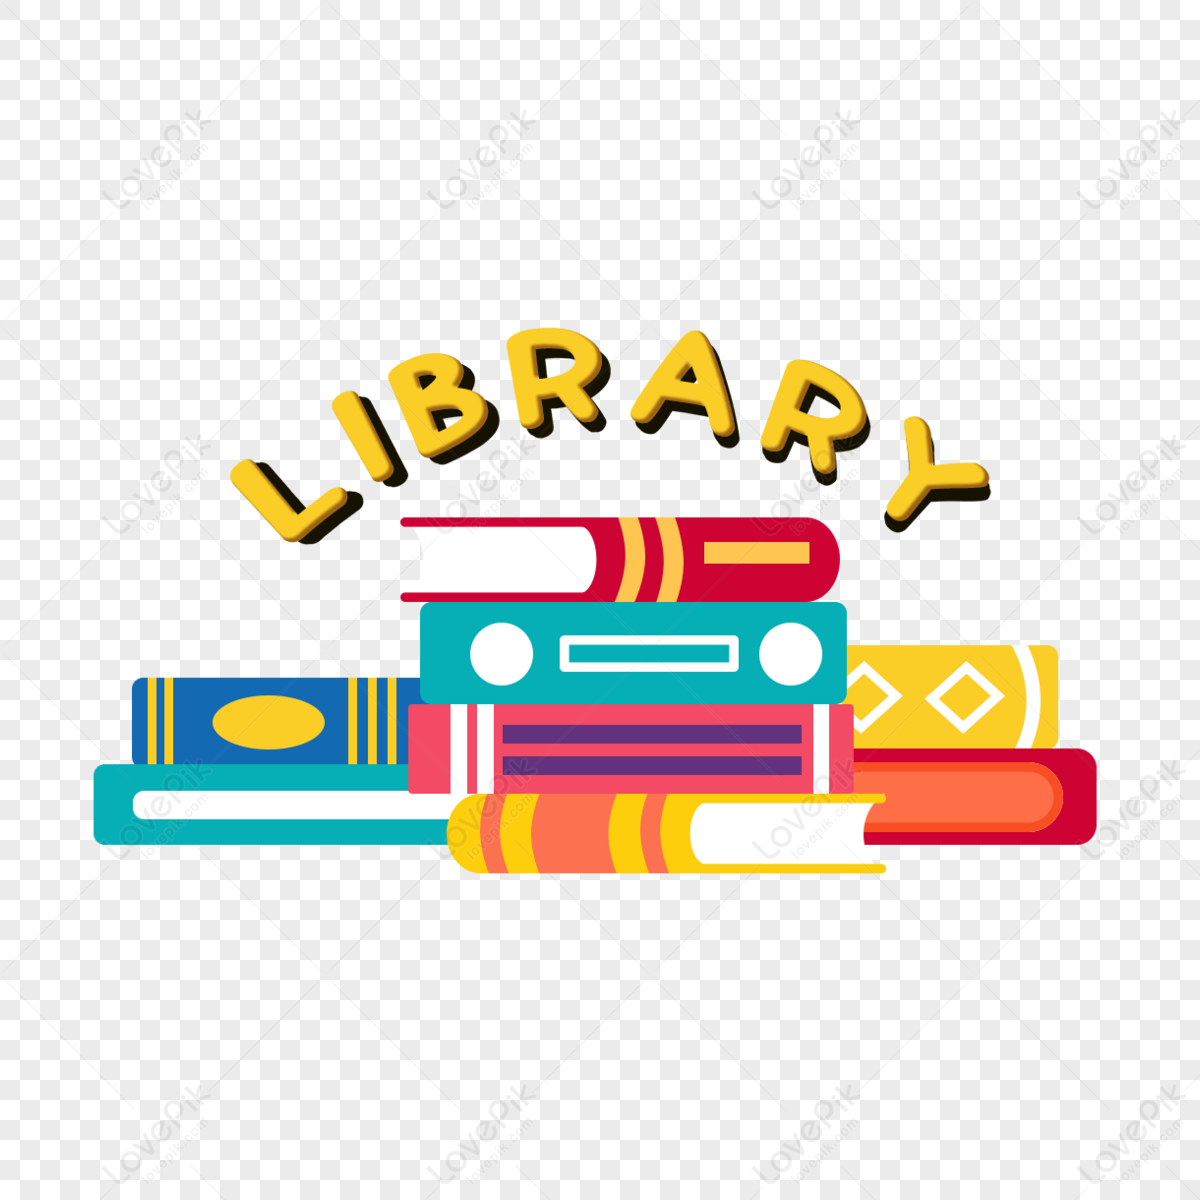 Library cartoon stacking books, Library,  Design,  Book png transparent background